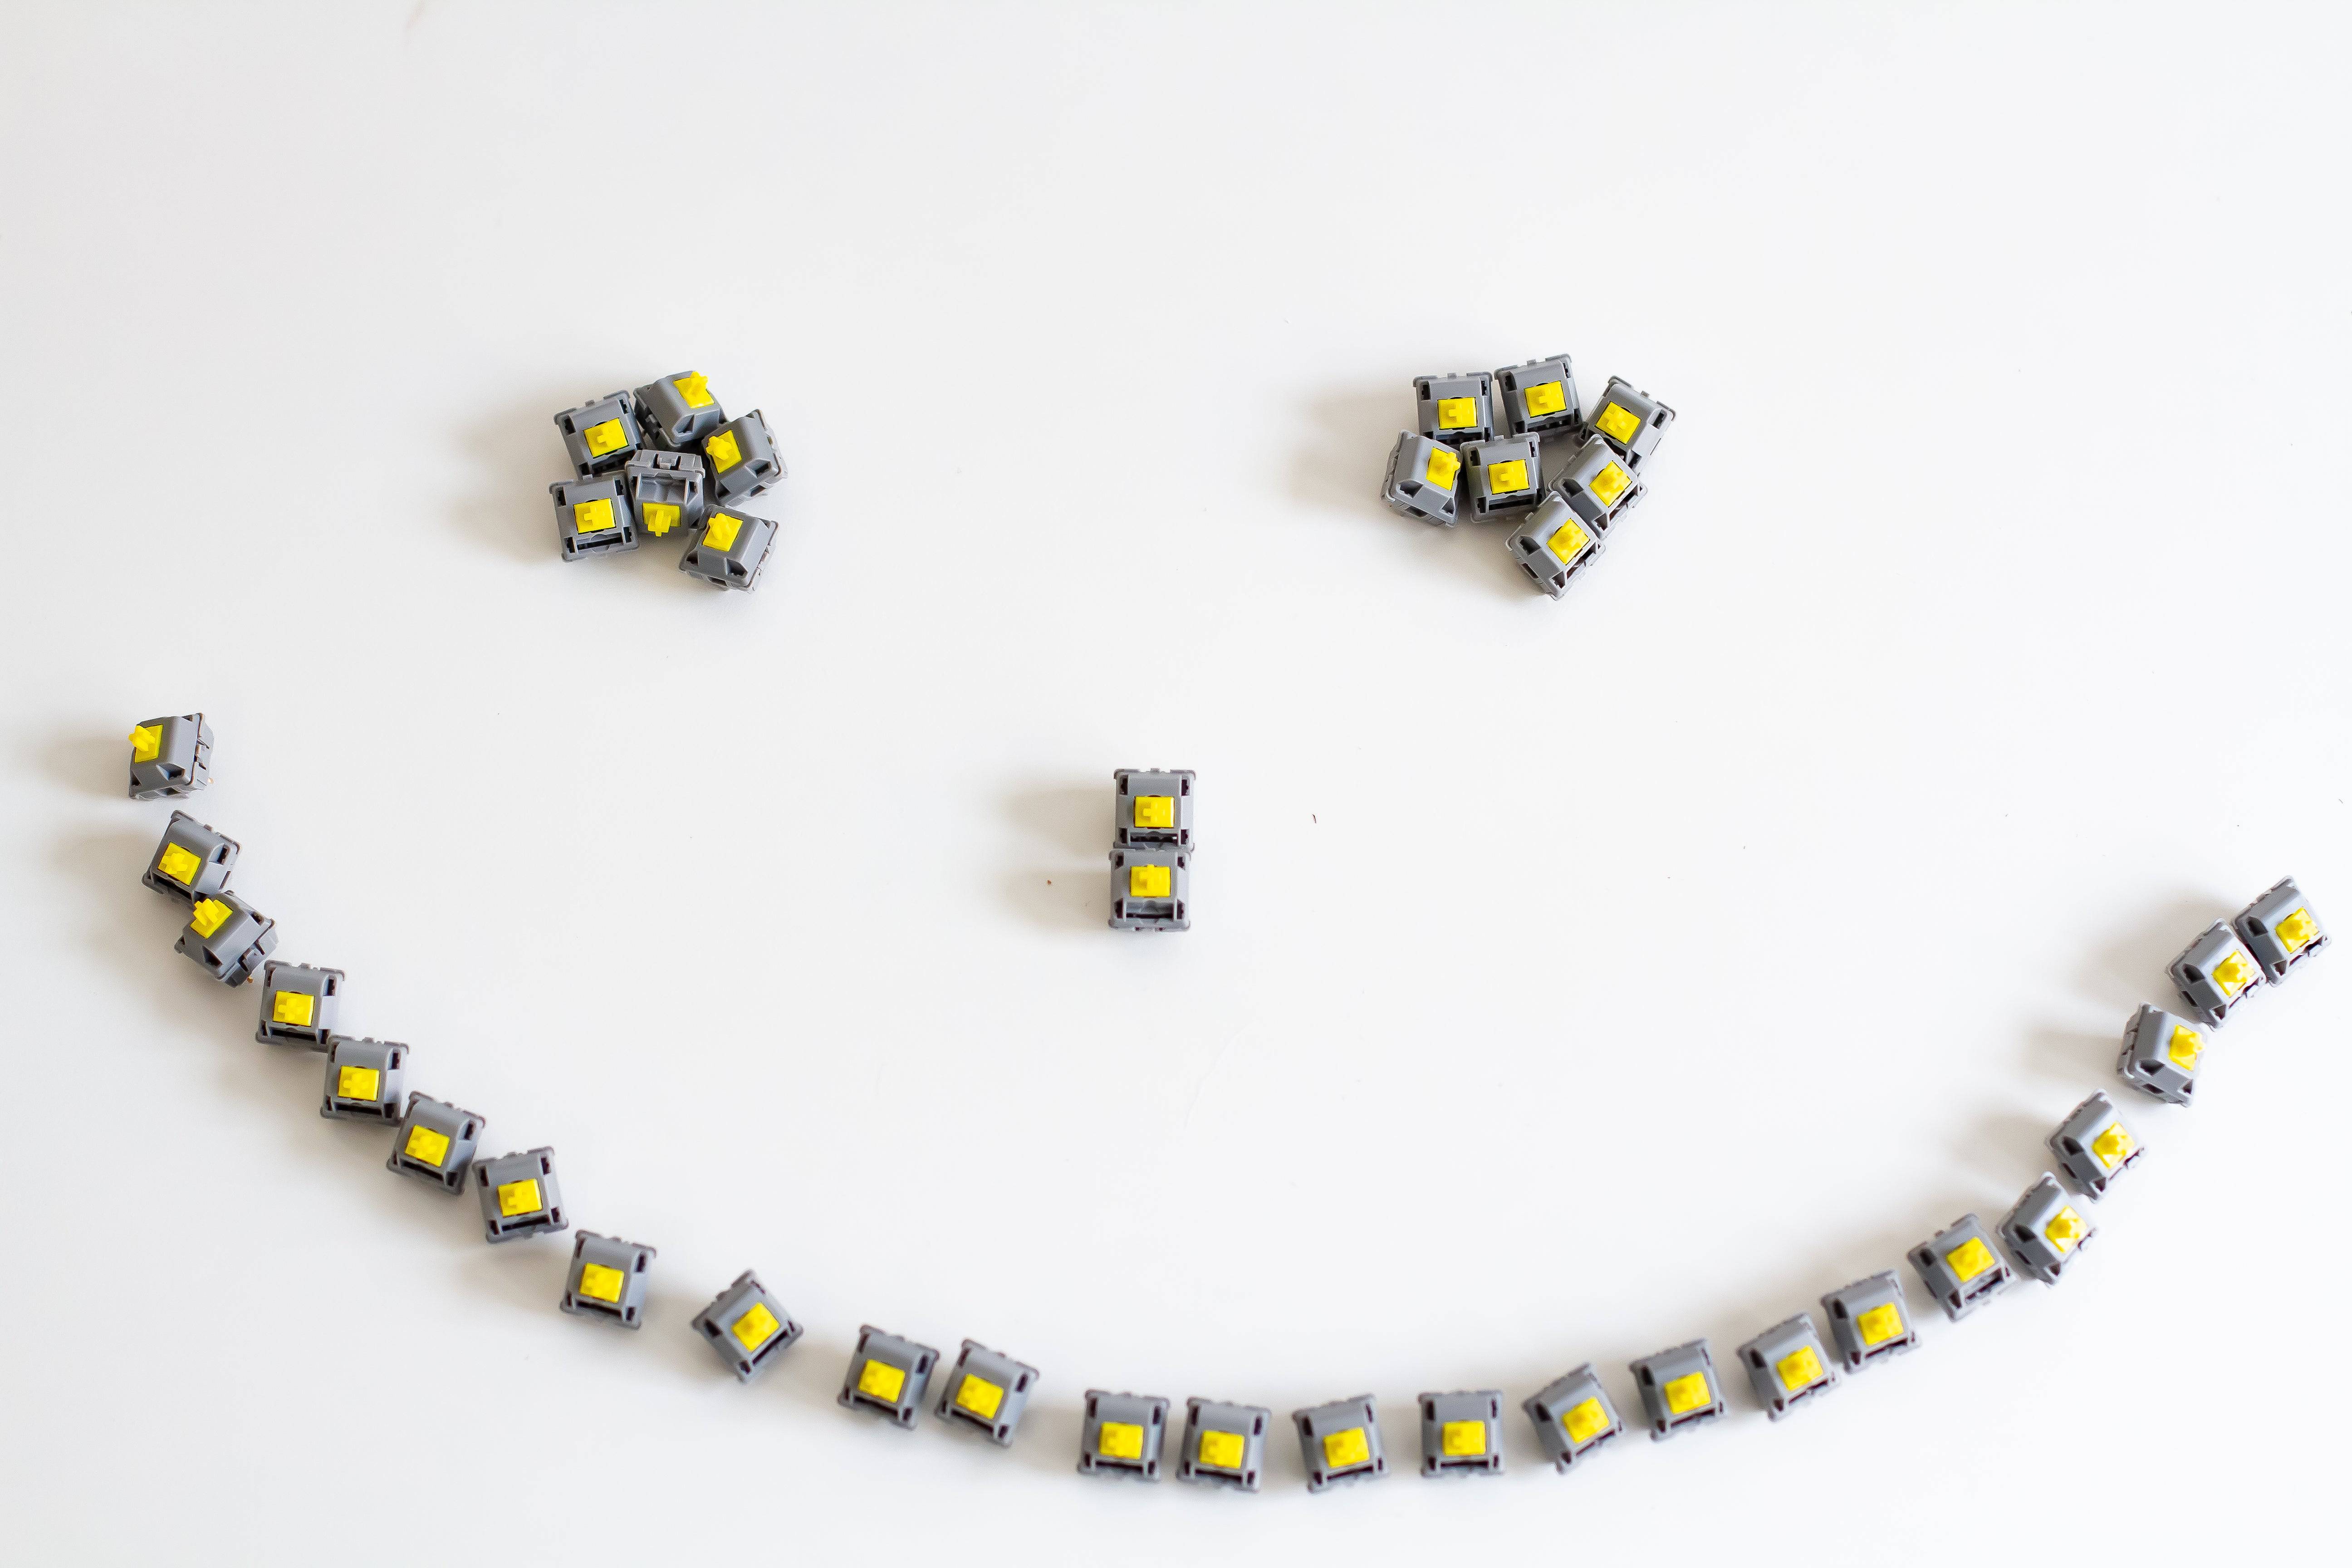 A batch of JWK Durock POM Tactile T1 sunflower mechanical switches arranged in a smiling face.